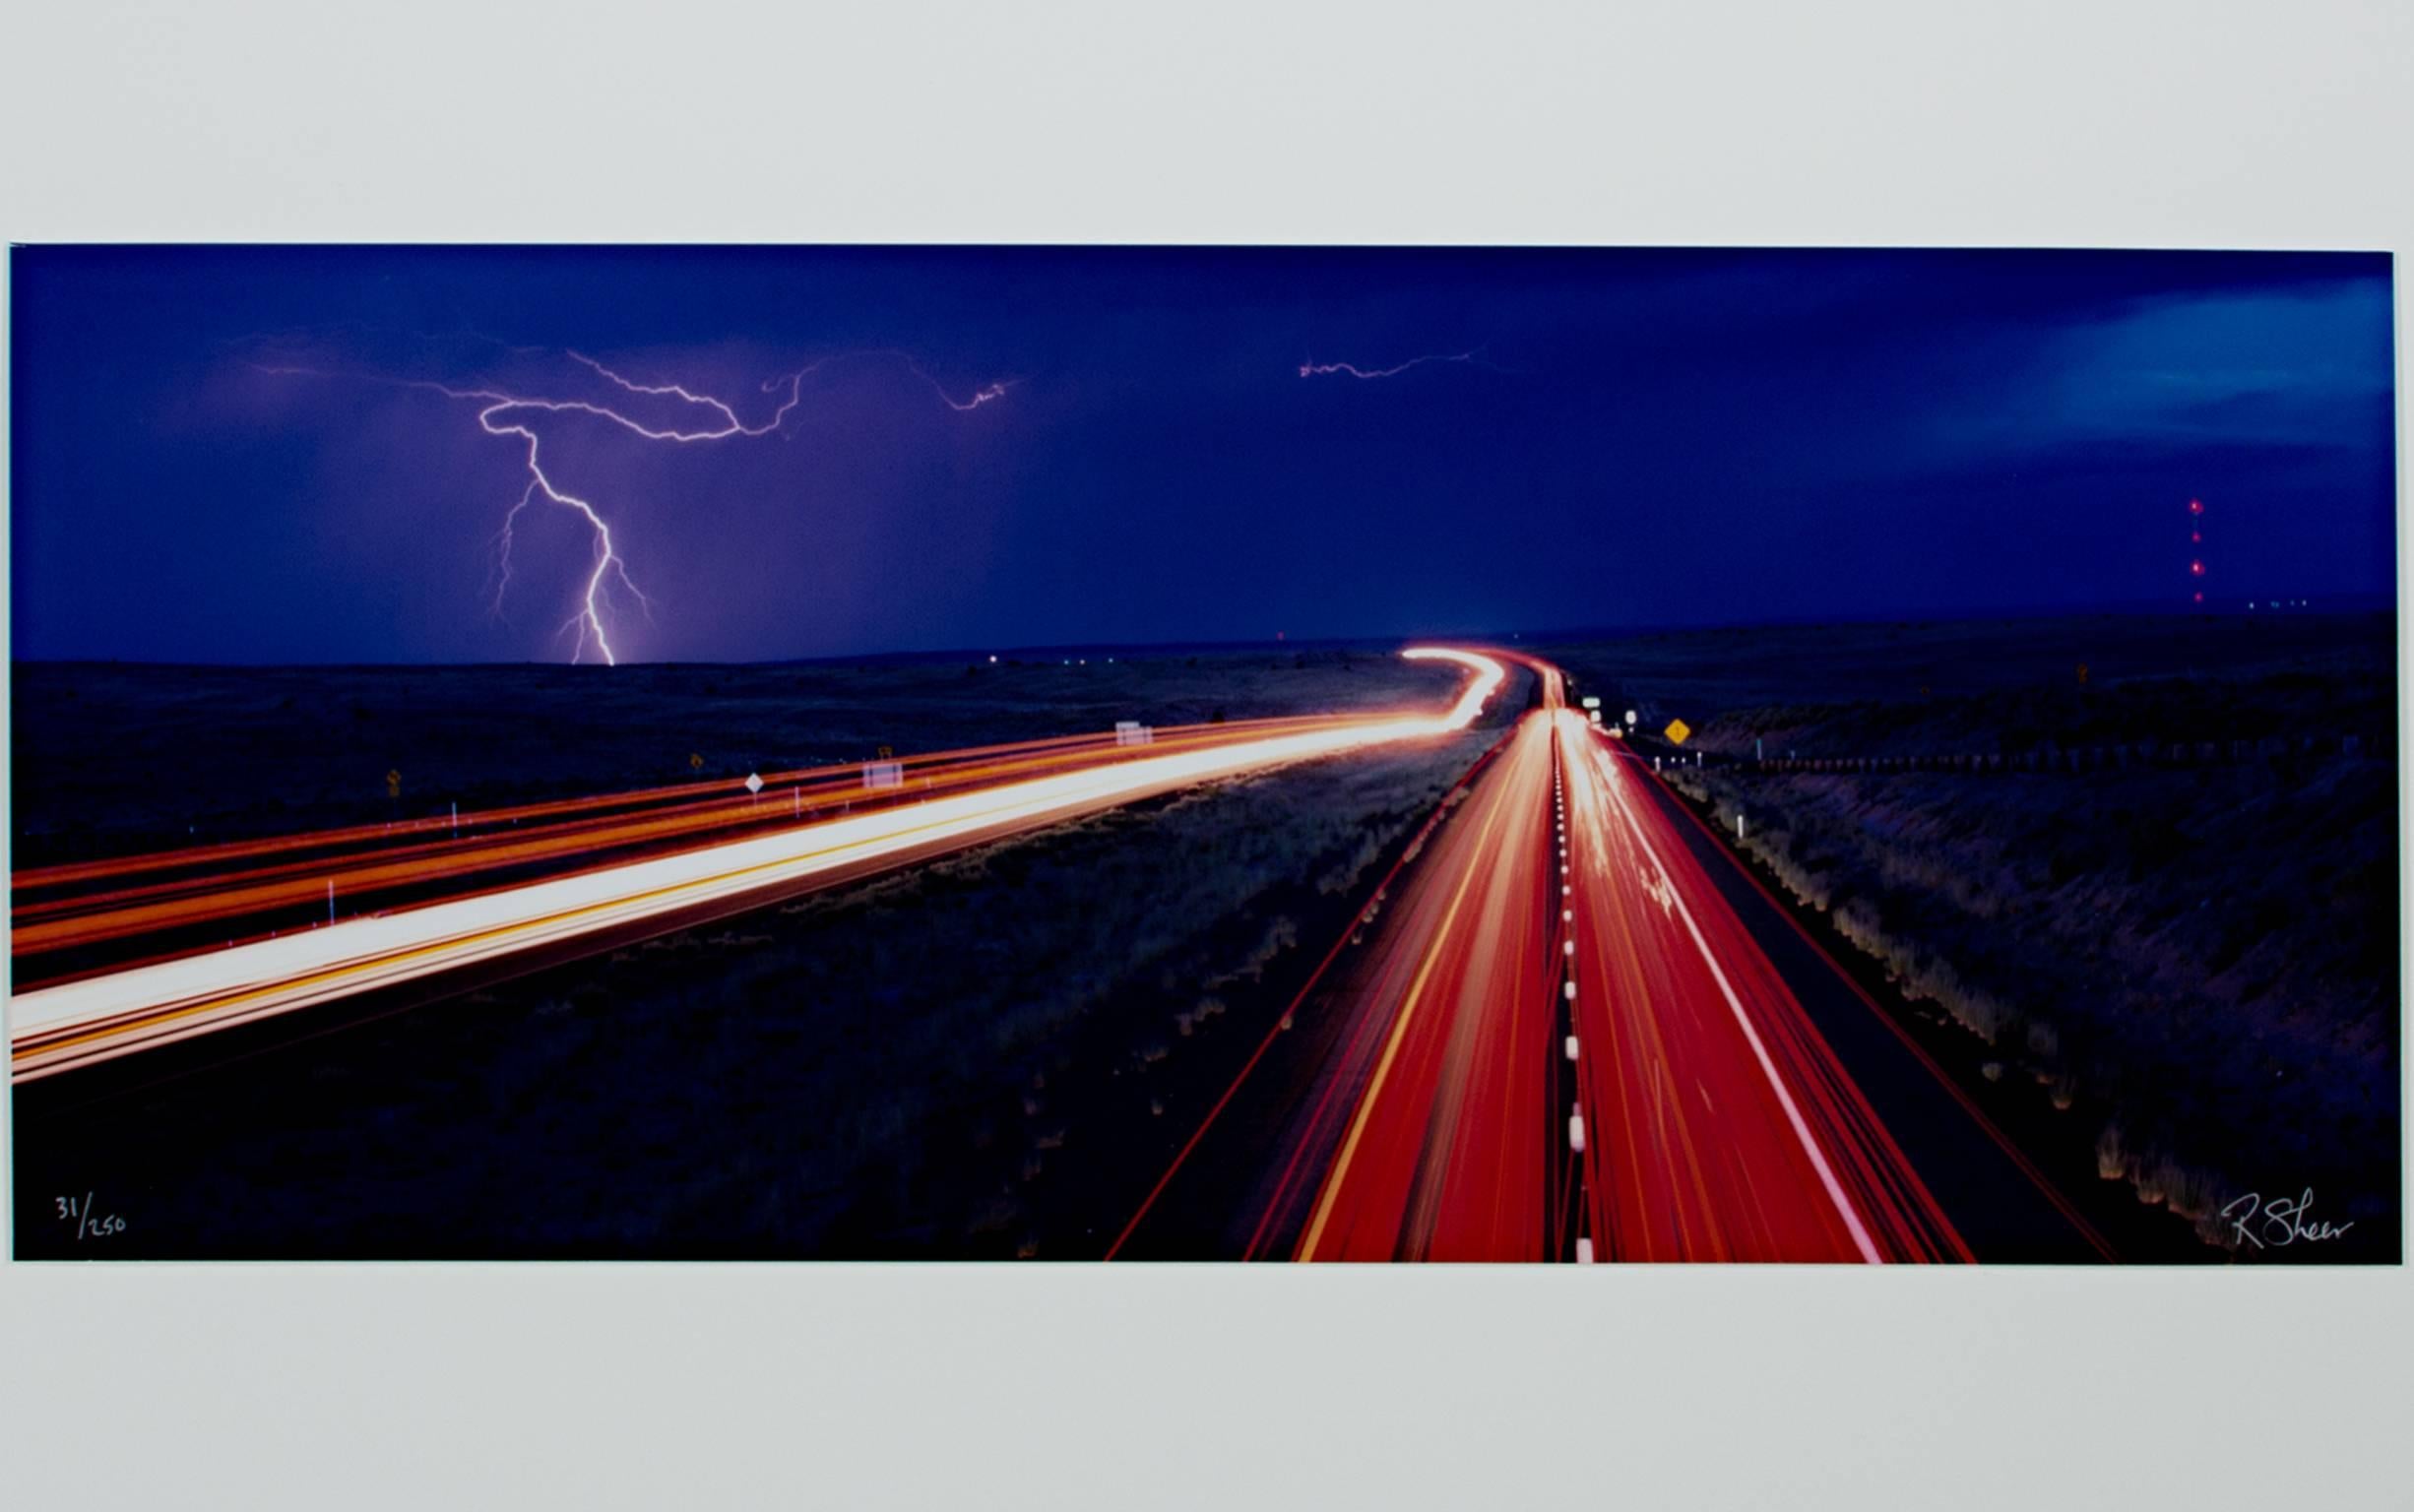 "Lightning Along Route 66 Arizona - Navajo Exit" is a long-exposure photograph by Robert Kawika Sheer. This limited edition photograph depicts the light trails from cars along America's famous Route 66. Kawika-Sheer also manages to catch a brilliant